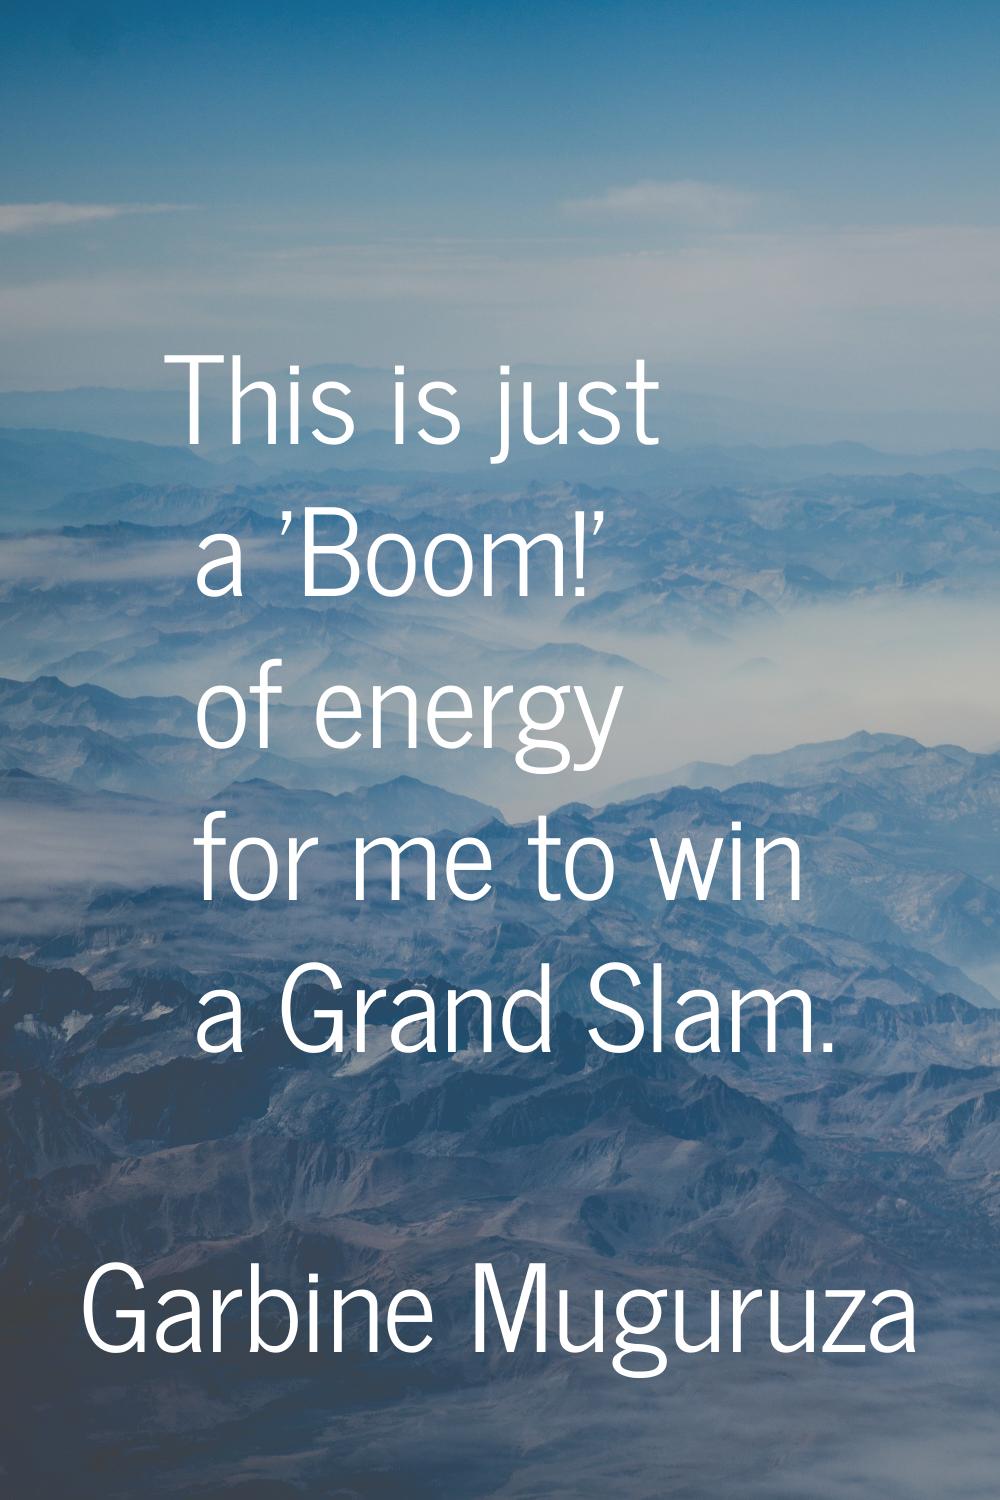 This is just a 'Boom!' of energy for me to win a Grand Slam.